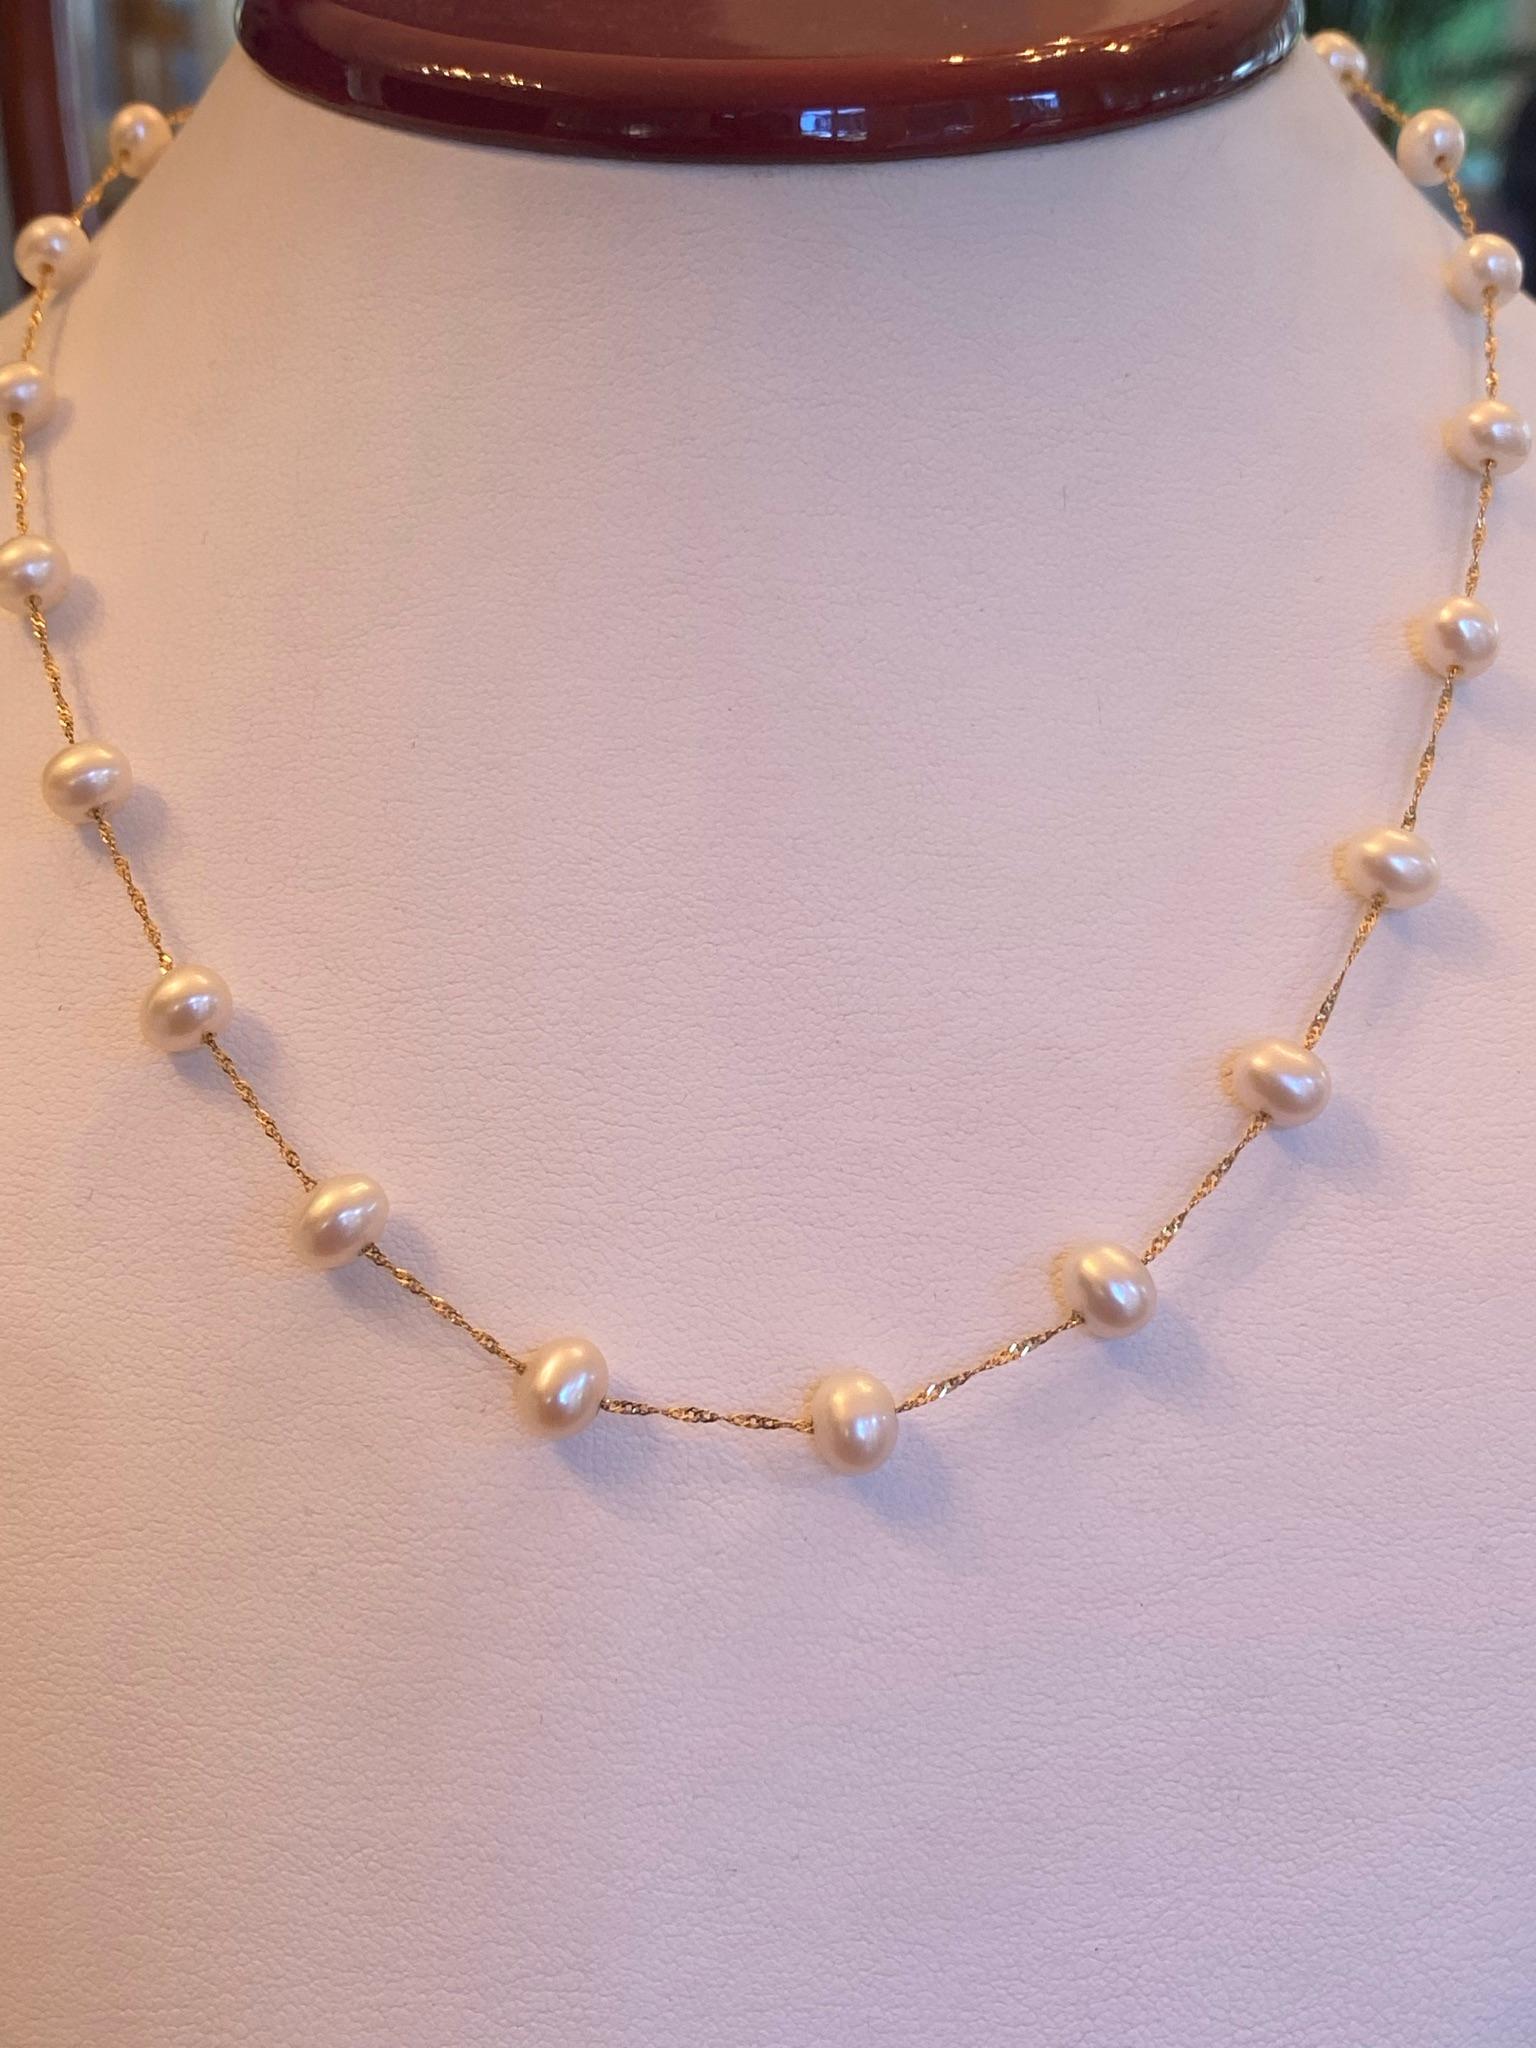 Freshwater White Pearl and 14kt Yellow Gold Necklace   In Good Condition For Sale In Denver, CO